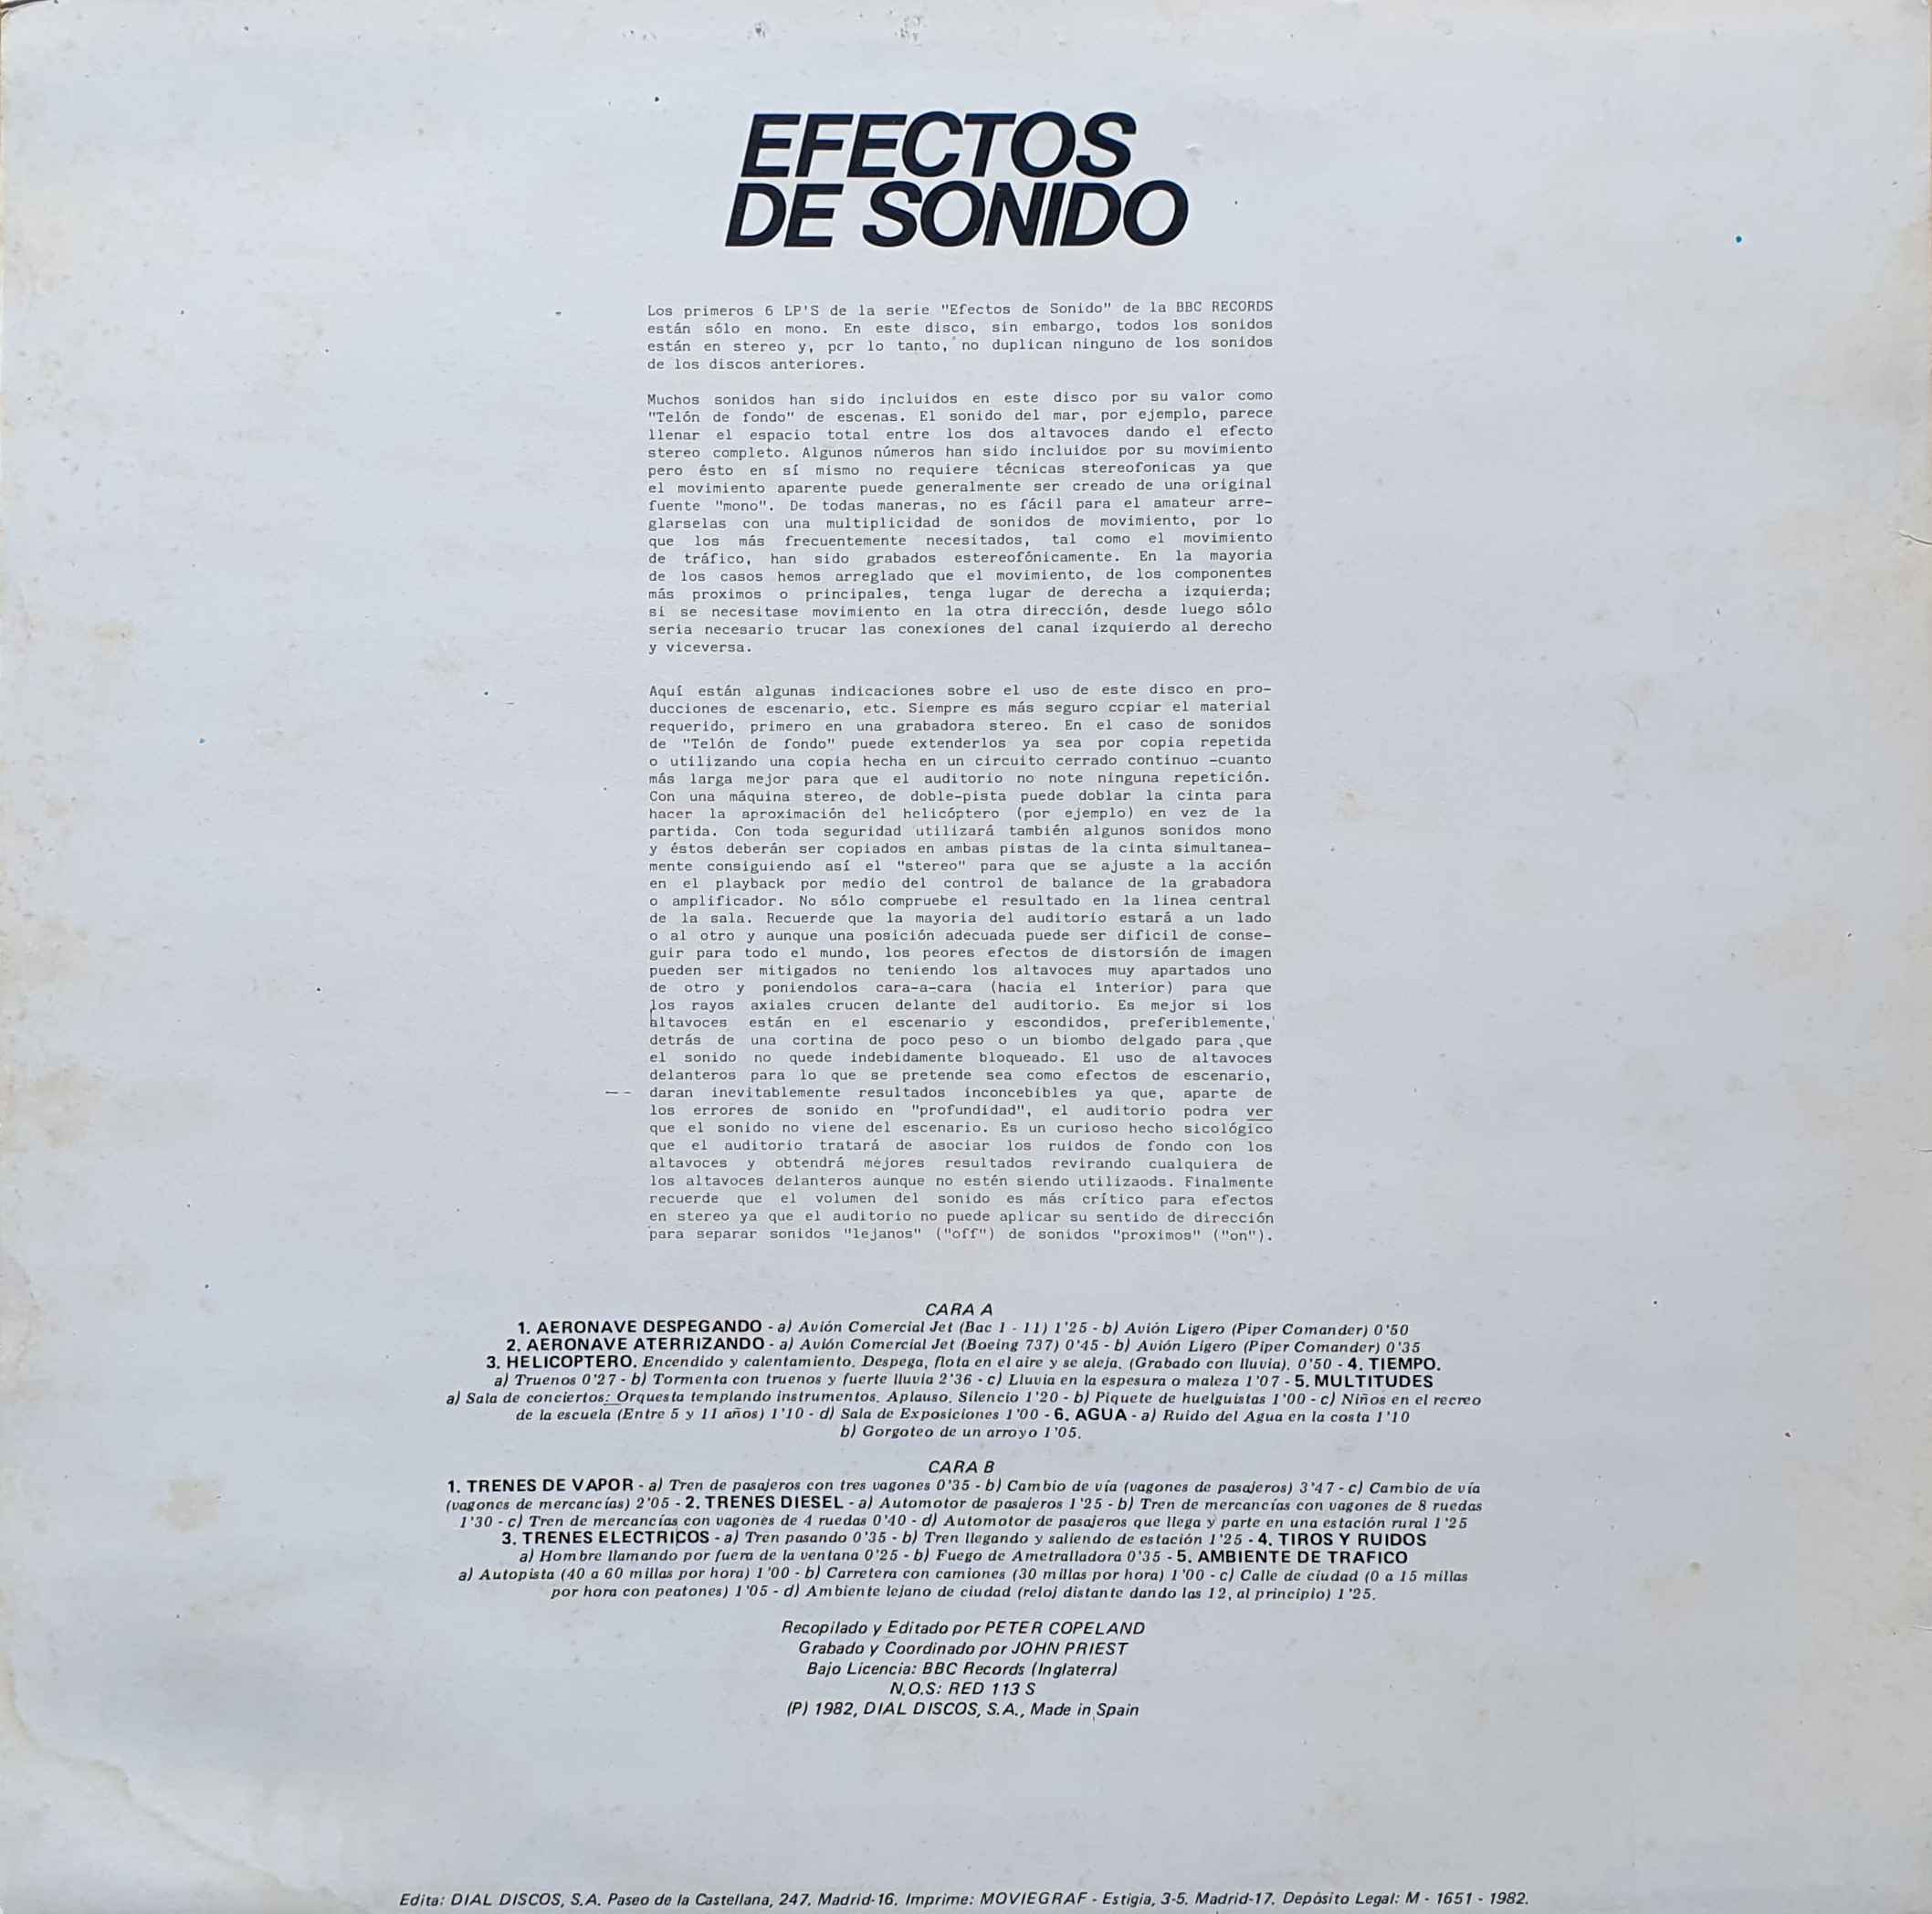 Picture of 51.0111 Efectos de sonido No 7 by artist Various from the BBC records and Tapes library